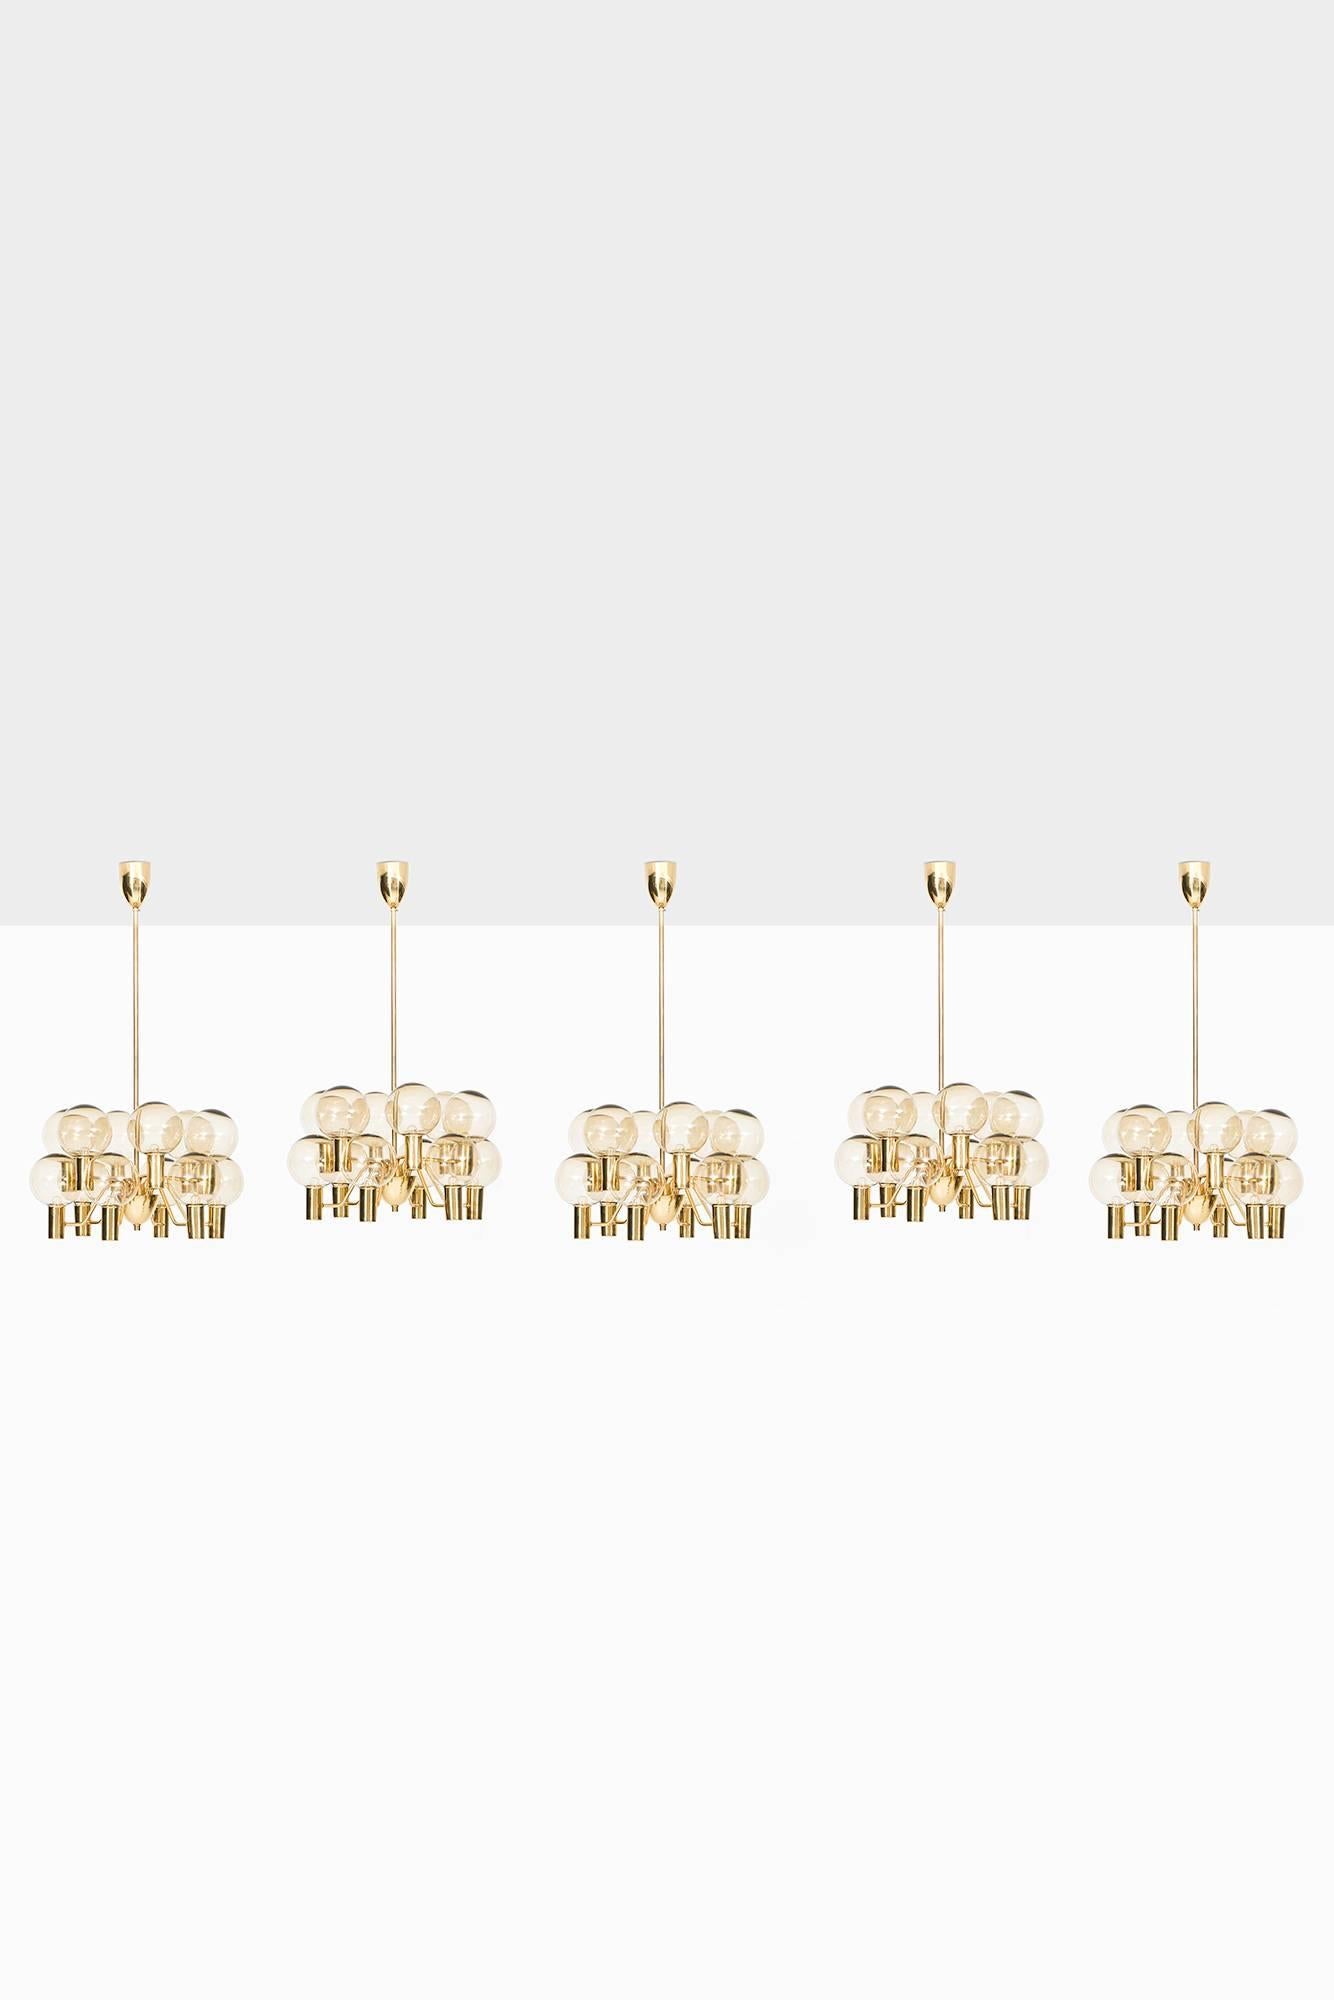 Set of 5 ceiling lamps model T372/12 'Patricia' designed by Hans-Agne Jakobsson. Produced by Hans-Agne Jakobsson AB in Markaryd, Sweden.